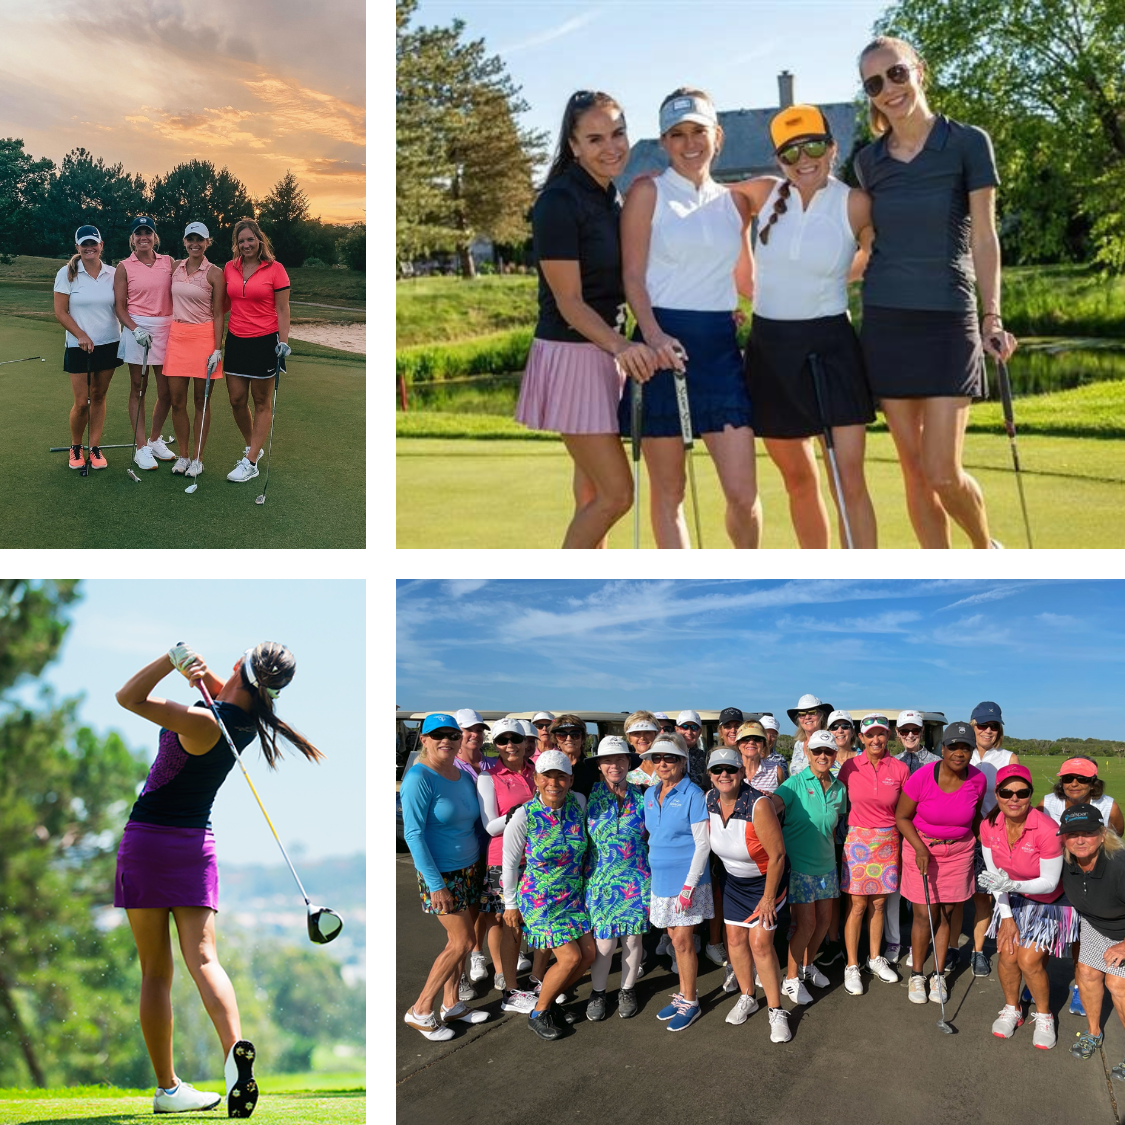 This is a photo collage of four photographs. Each one shows groups of women having fun together on the golf course. 